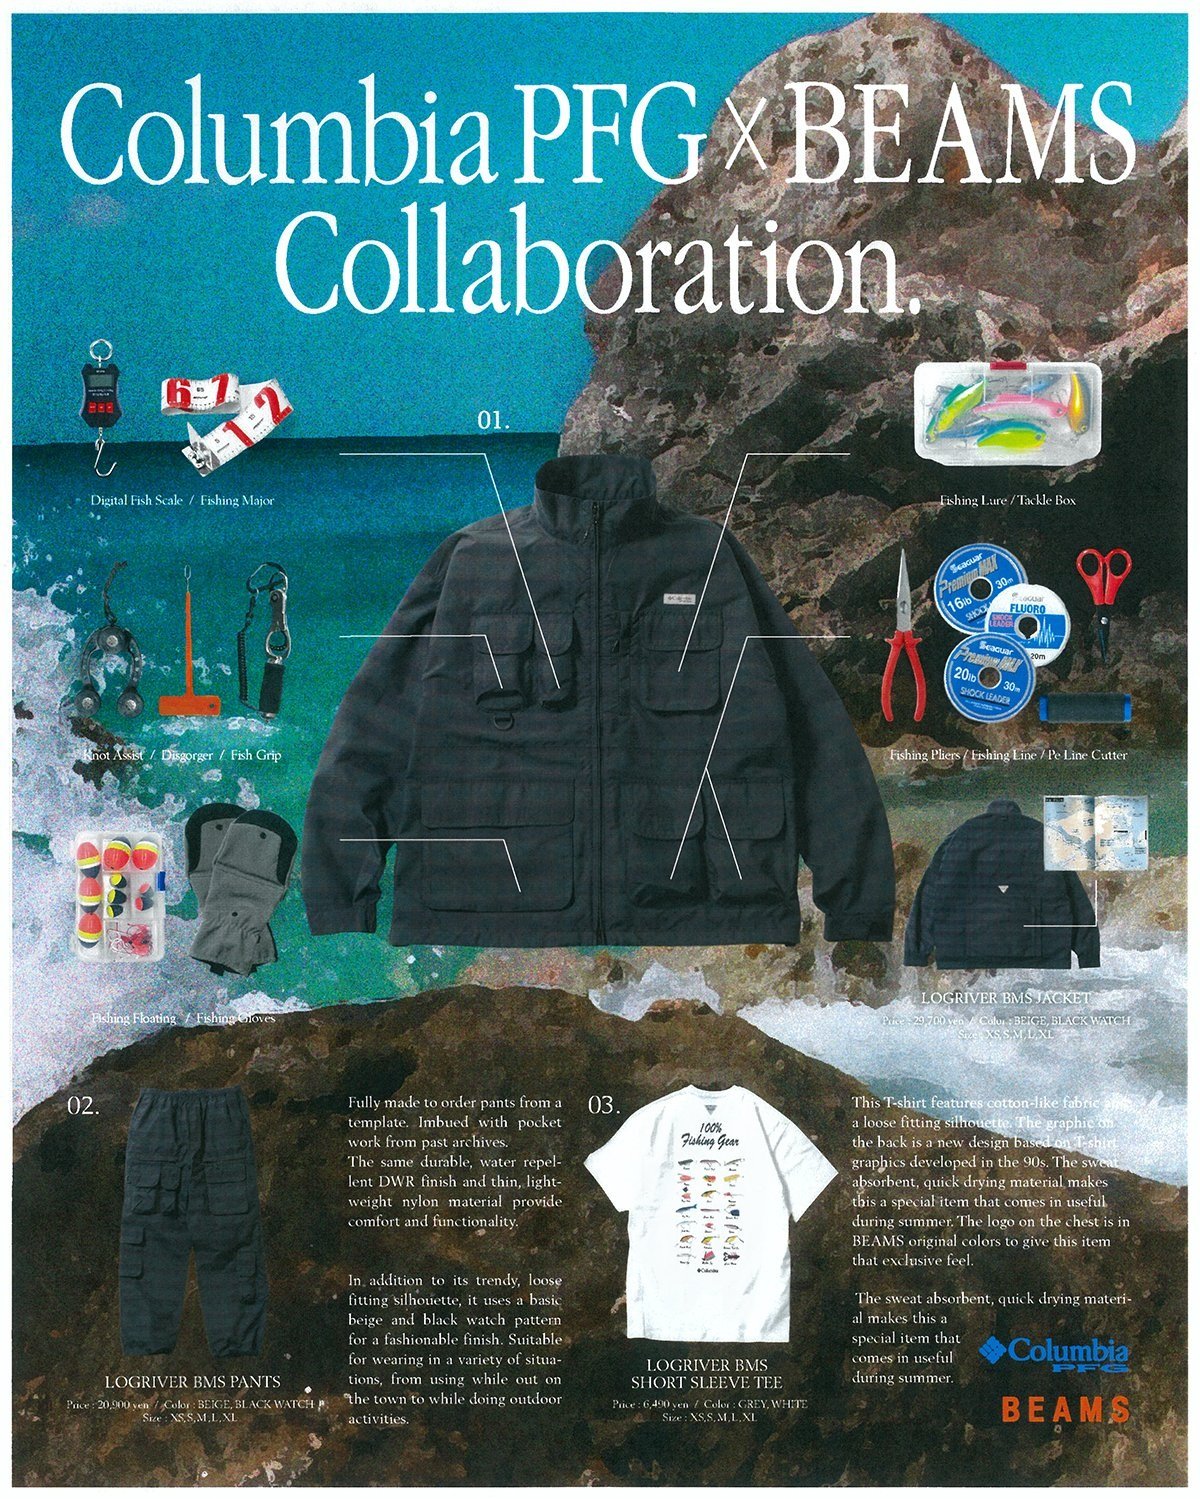 BEAMS and Columbia PFG Dig Into the Archives for Their Third 